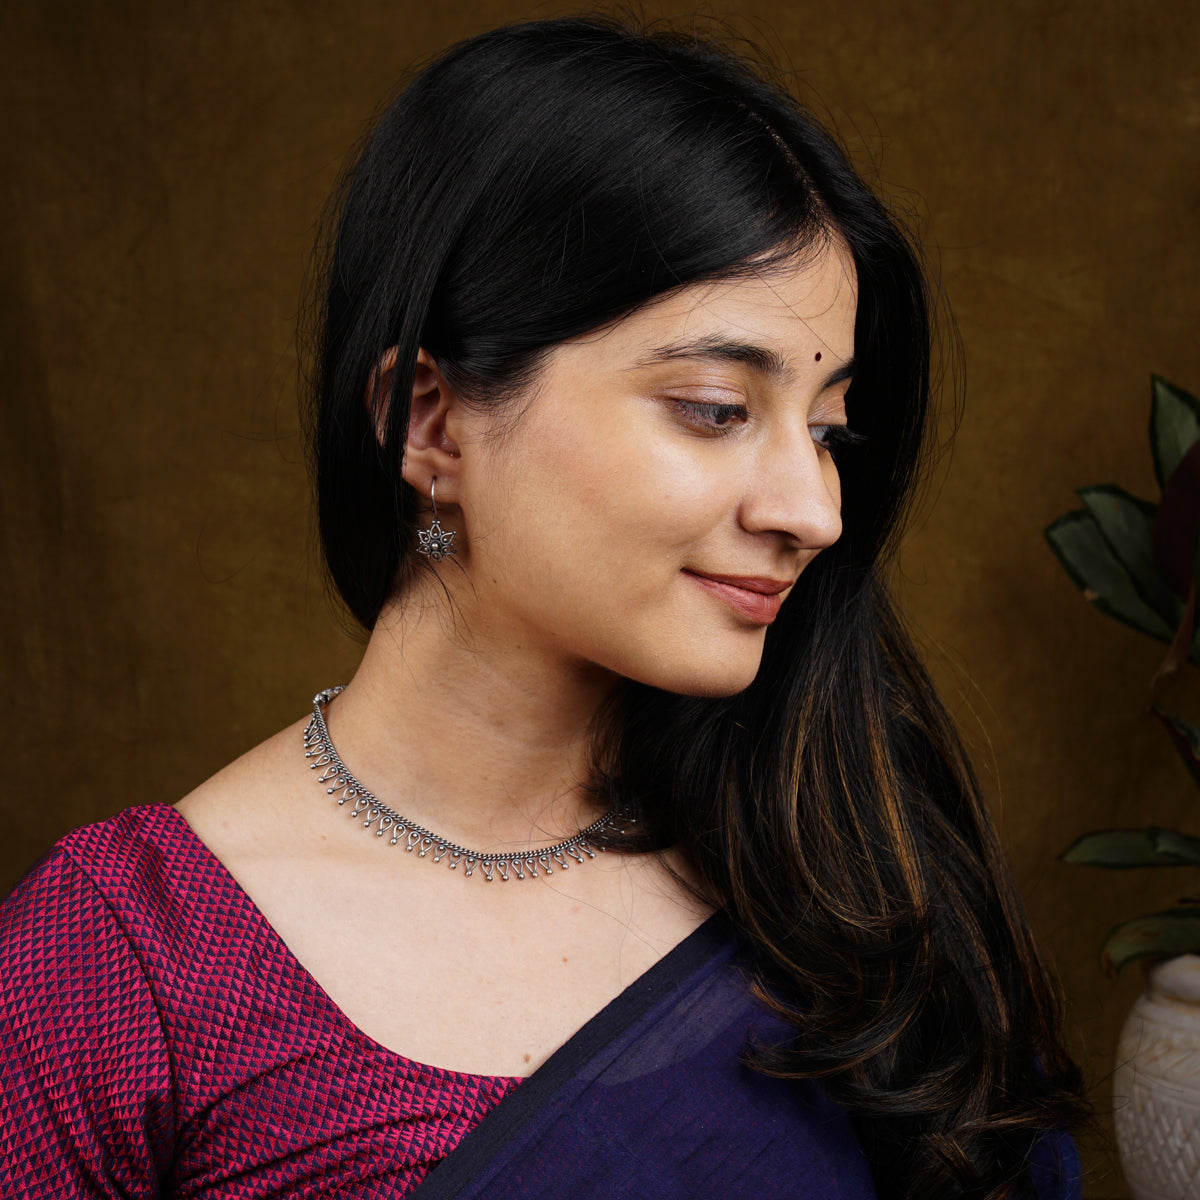 a woman wearing a necklace and a purple shirt